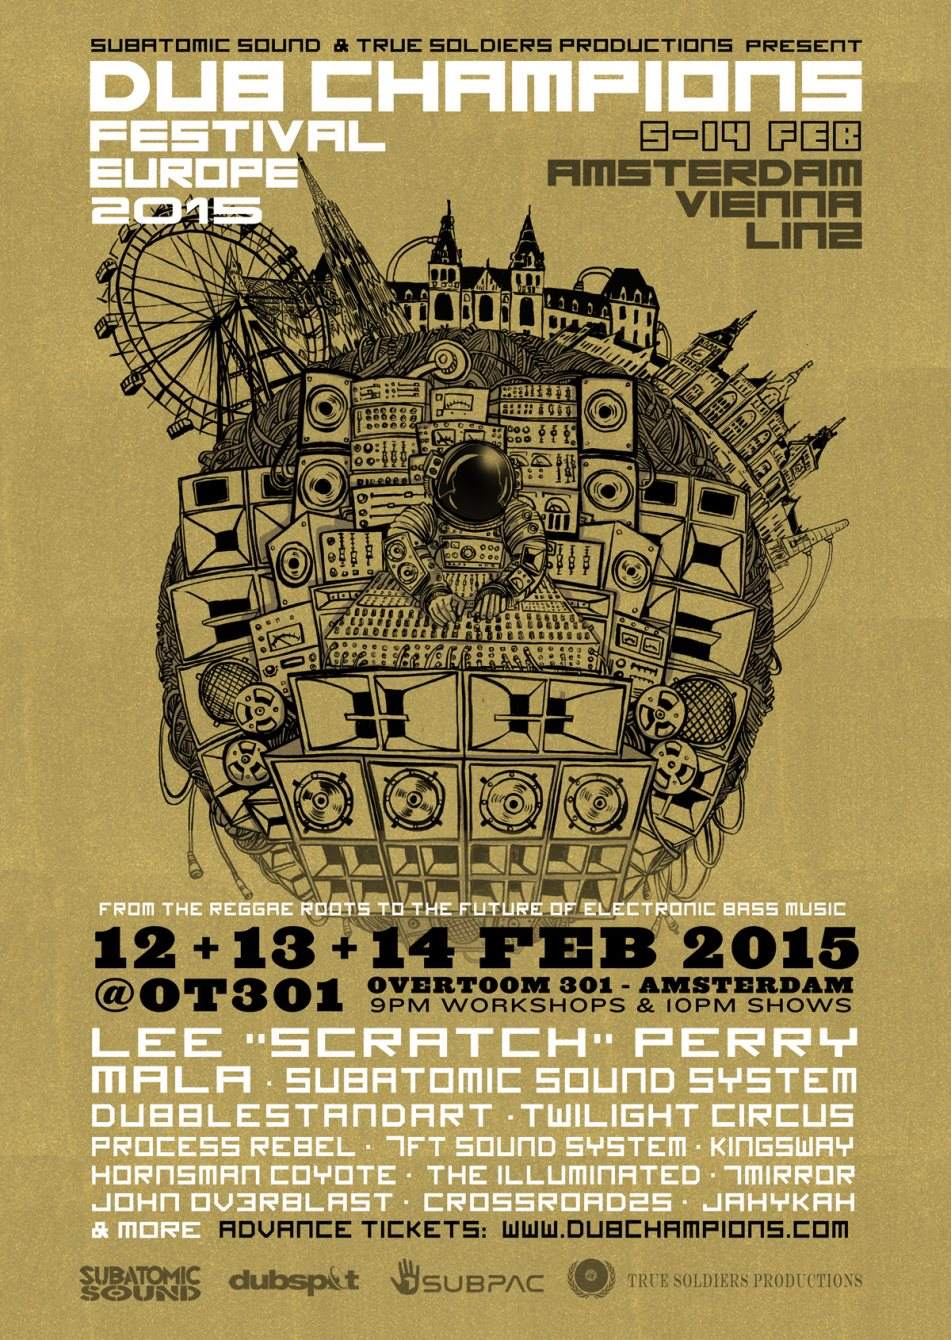 DUB Champions Festival presented by Subatomic Sound and True Soldiers Productions - Página frontal